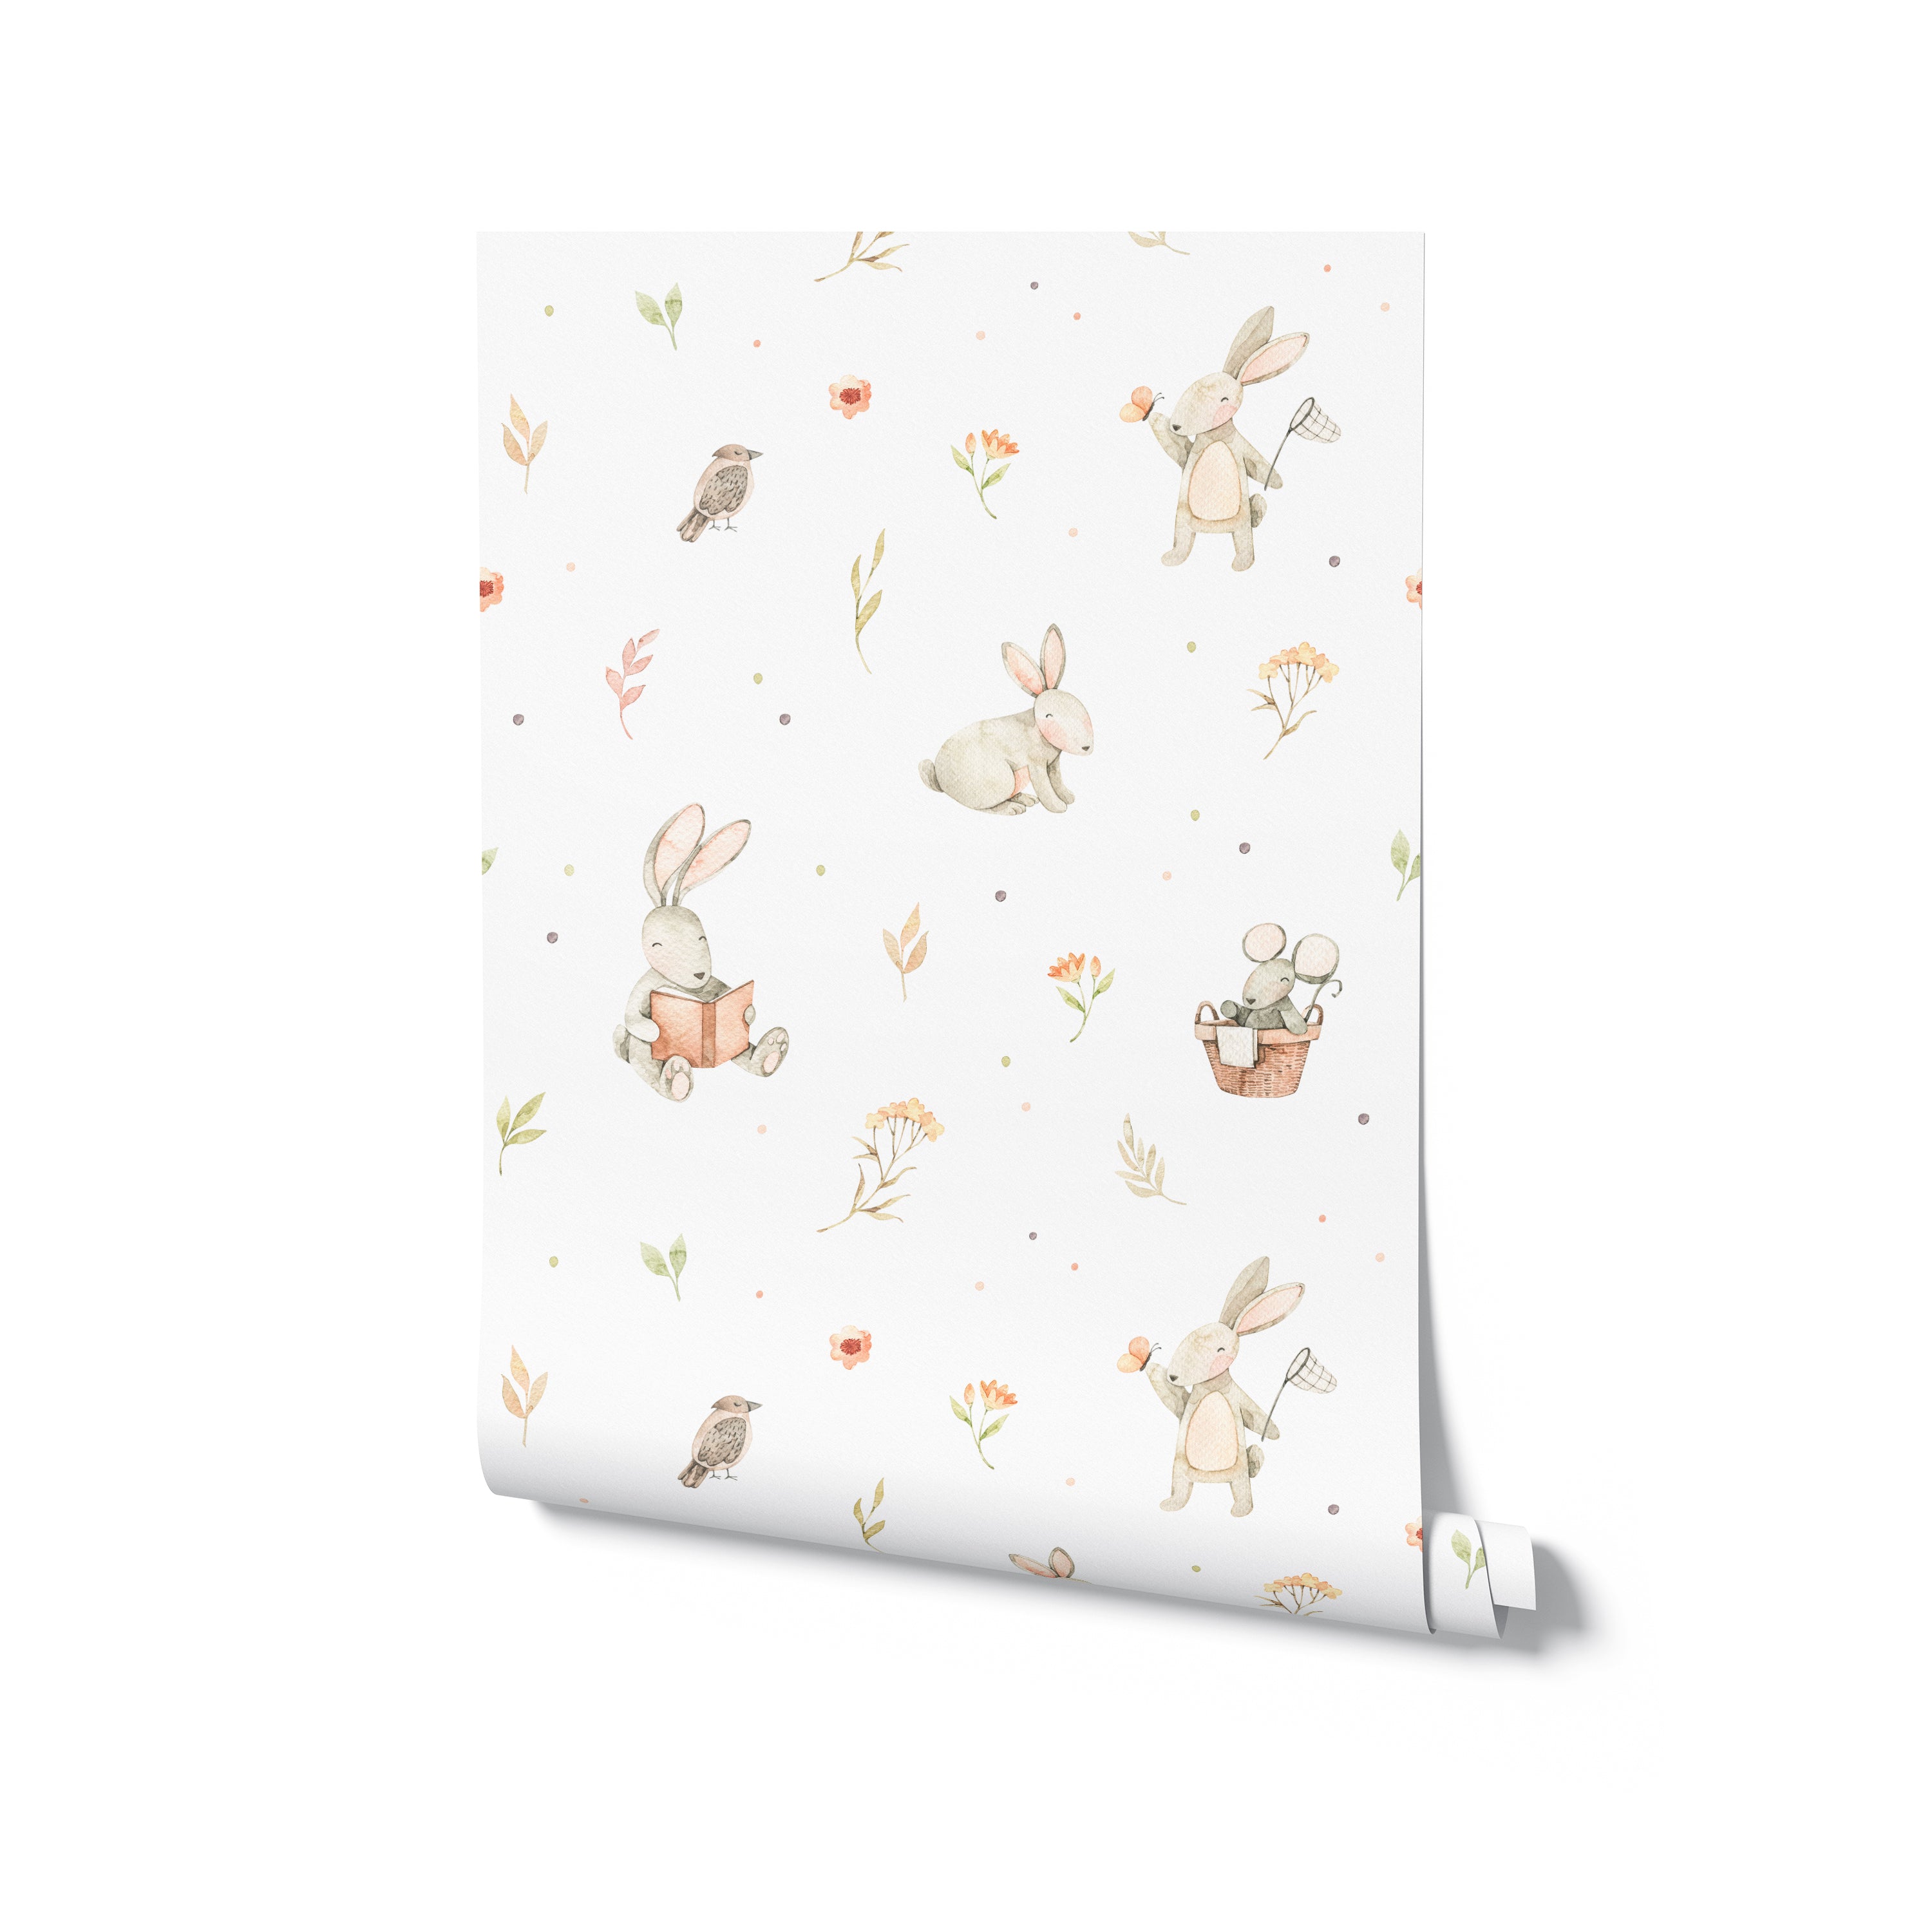 A roll of Watercolour Bunnies Wallpaper displaying the full pattern of adorable bunnies, tiny birds, and scattered foliage in pastel colors. This design is perfect for adding a touch of whimsy and nature to children’s rooms or play areas